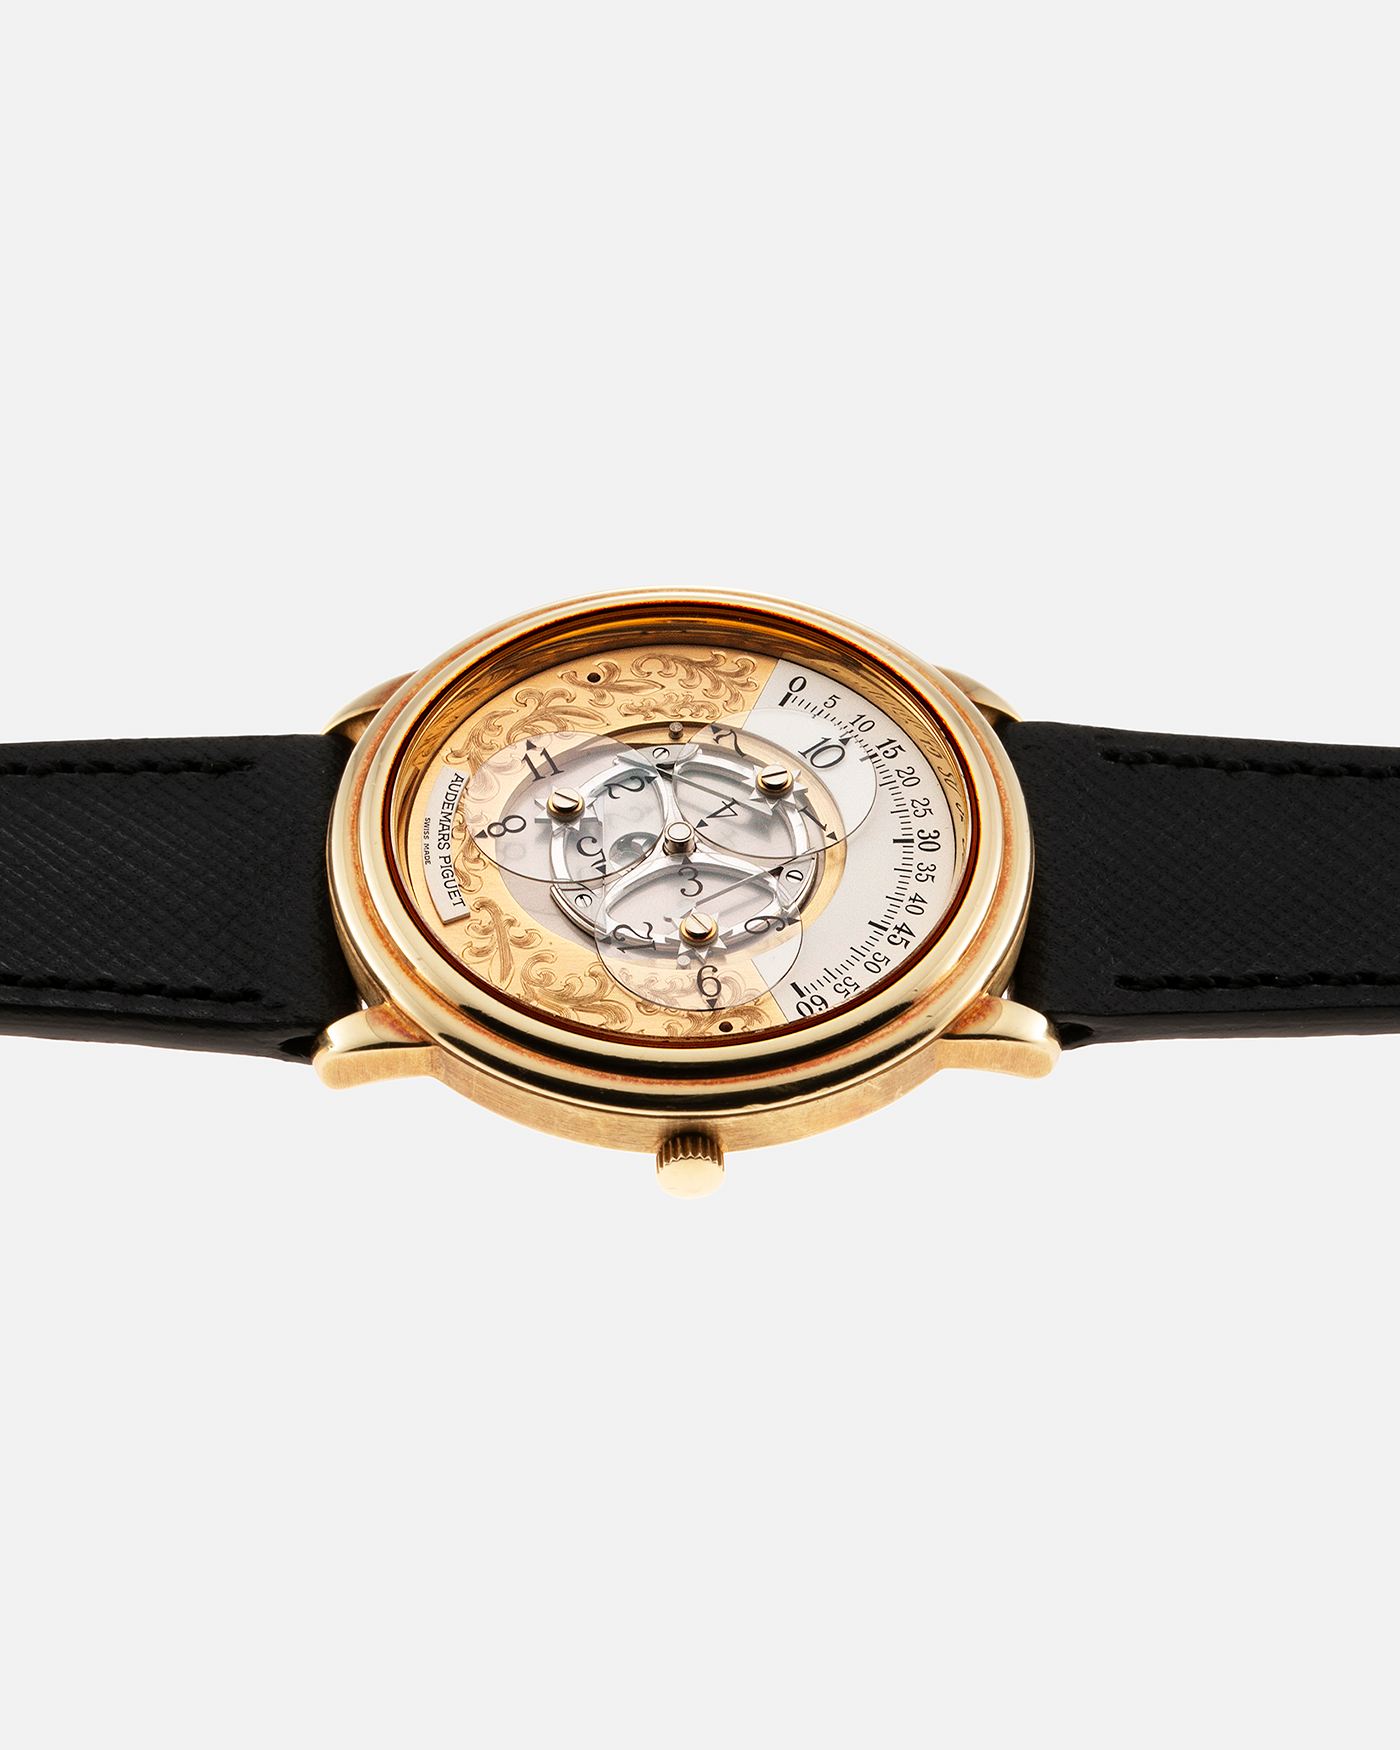 Brand: Audemars Piguet Year: 1990’s Model: Star Wheel Reference Number: 25720BA Material: 18-carat Yellow Gold  Movement: AP Cal. 2224, Self-Winding Case Diameter: 36mm Strap: Molequin Black Textured Calf Leather Strap with 18-carat Yellow Gold Signed Deployant Clasp